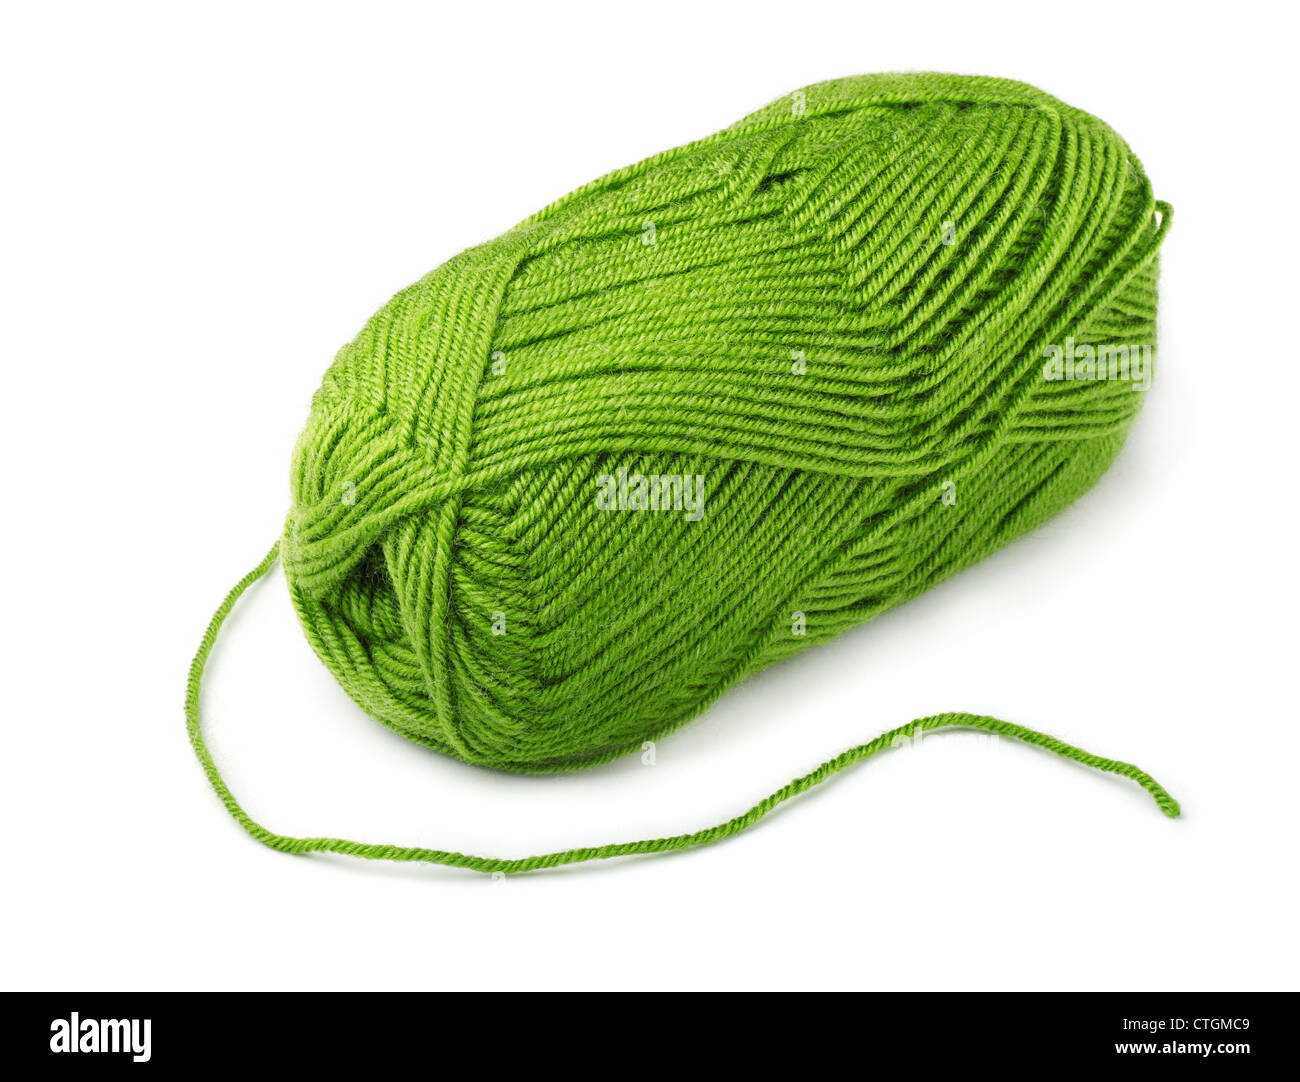 Skein of green yarn isolated on white Stock Photo